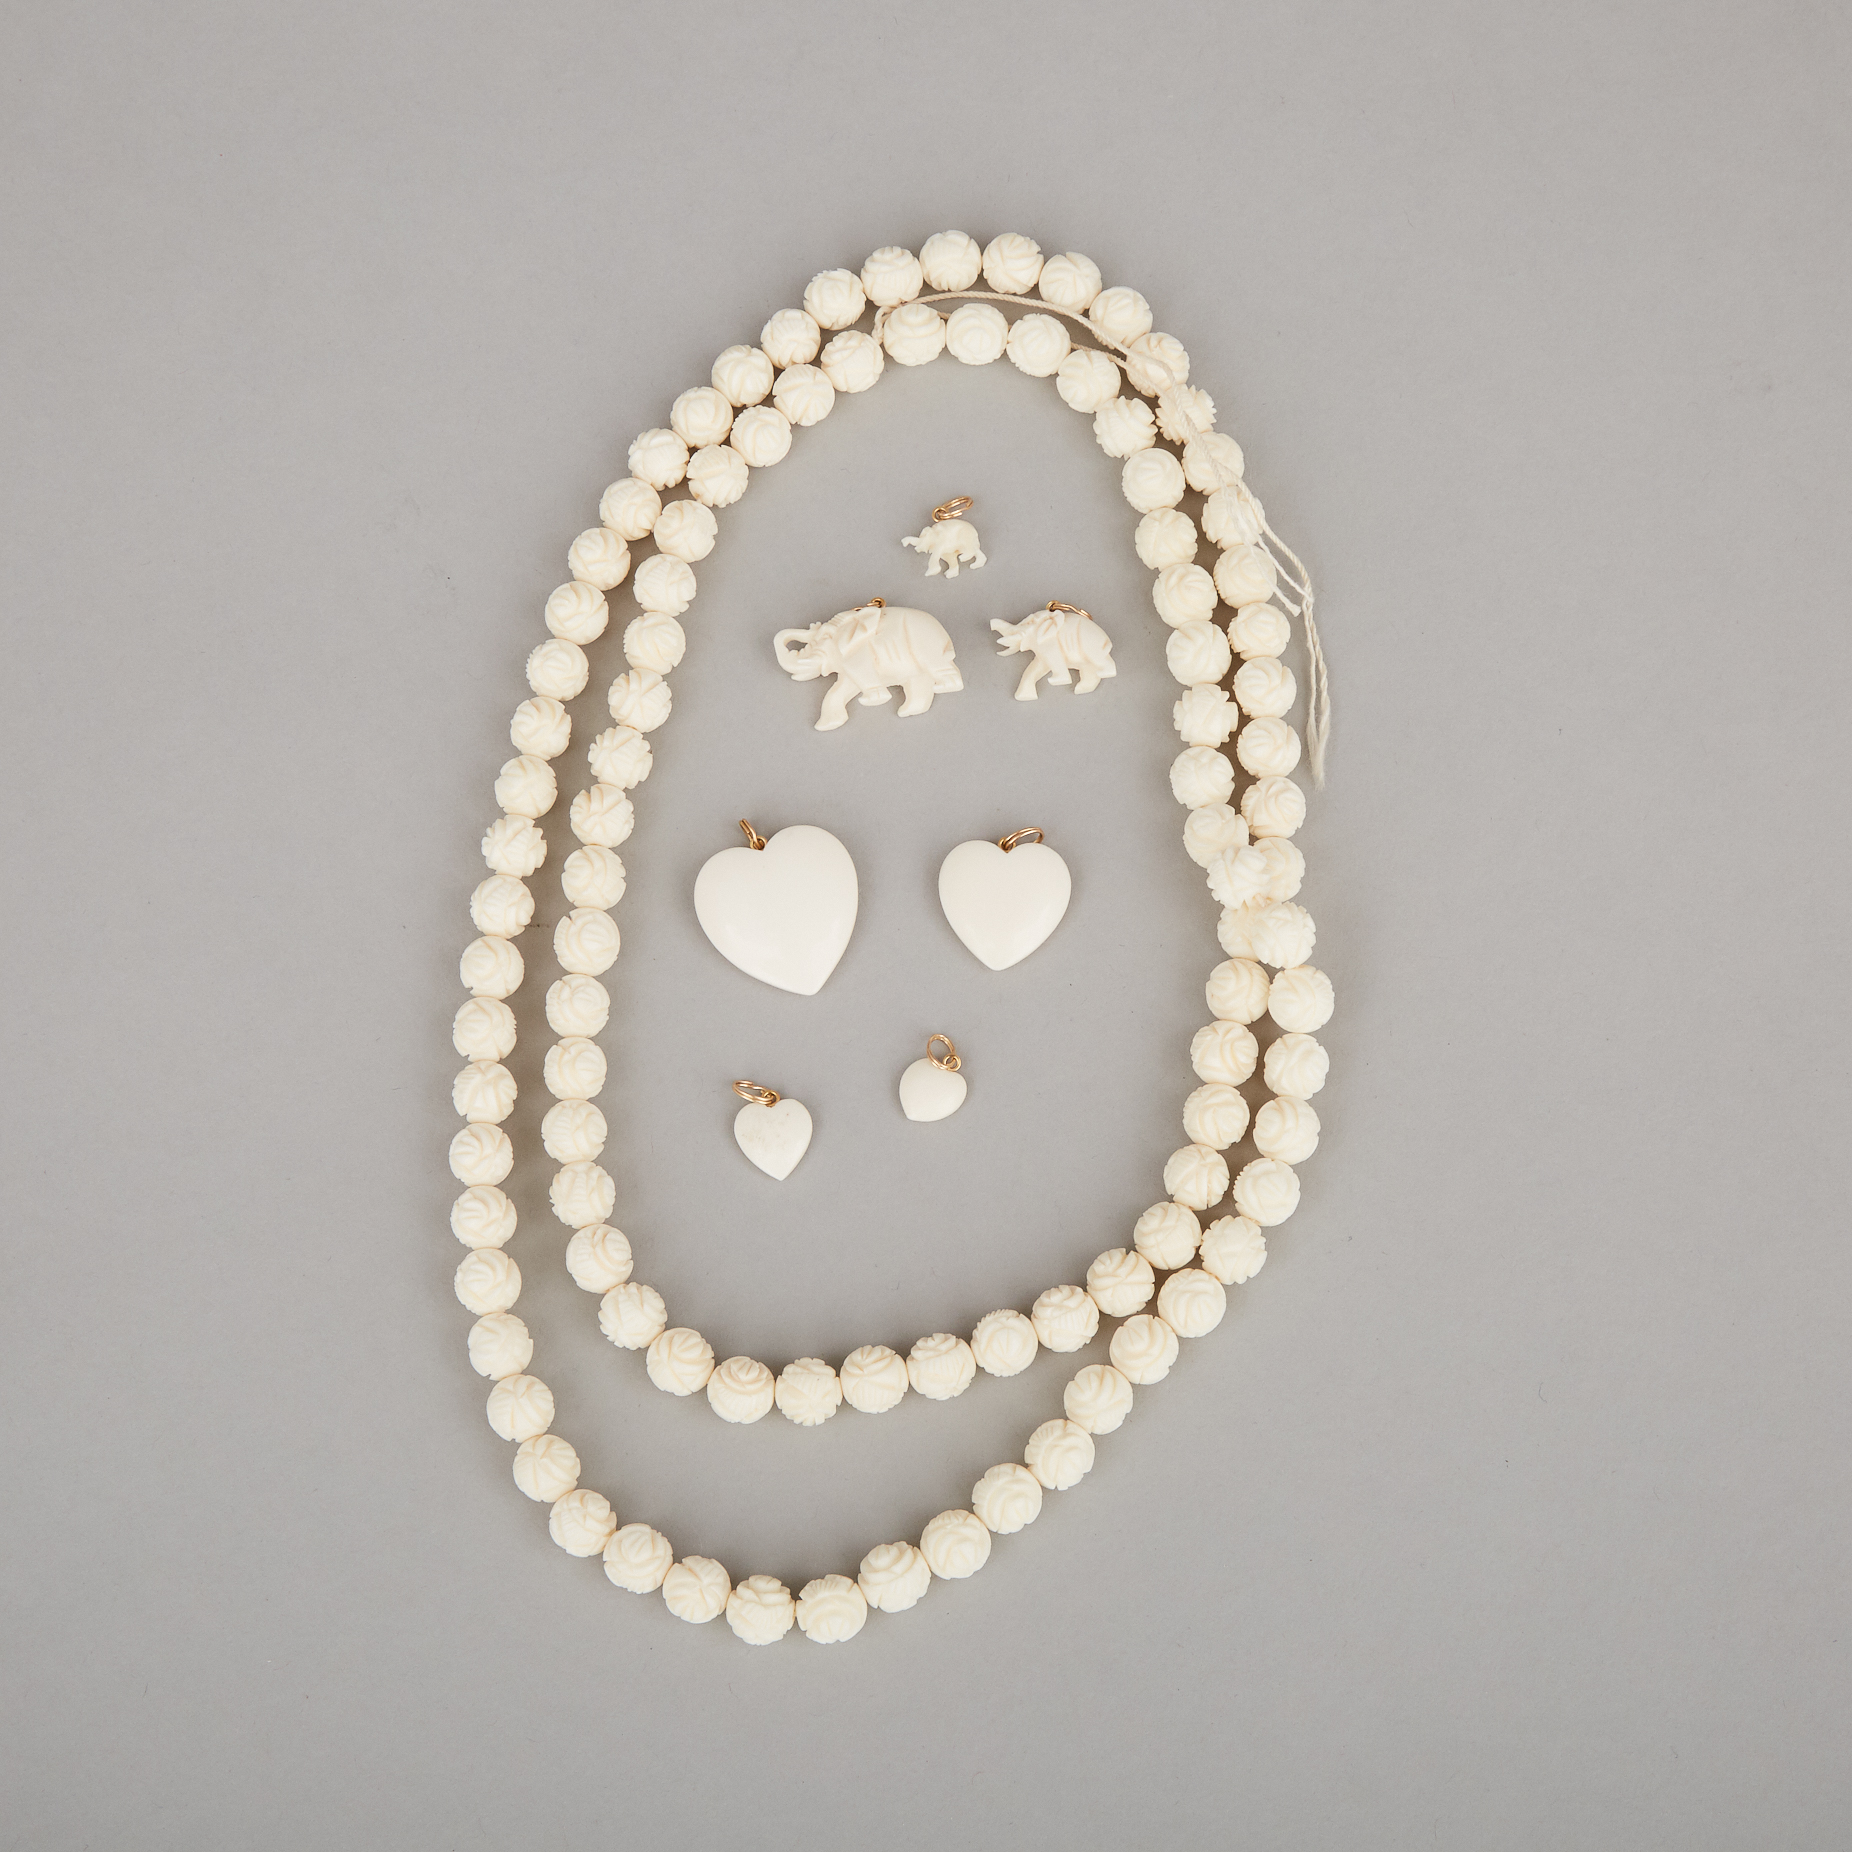 A Group of Ivory Carved Jewellery Pieces, Circa 1940